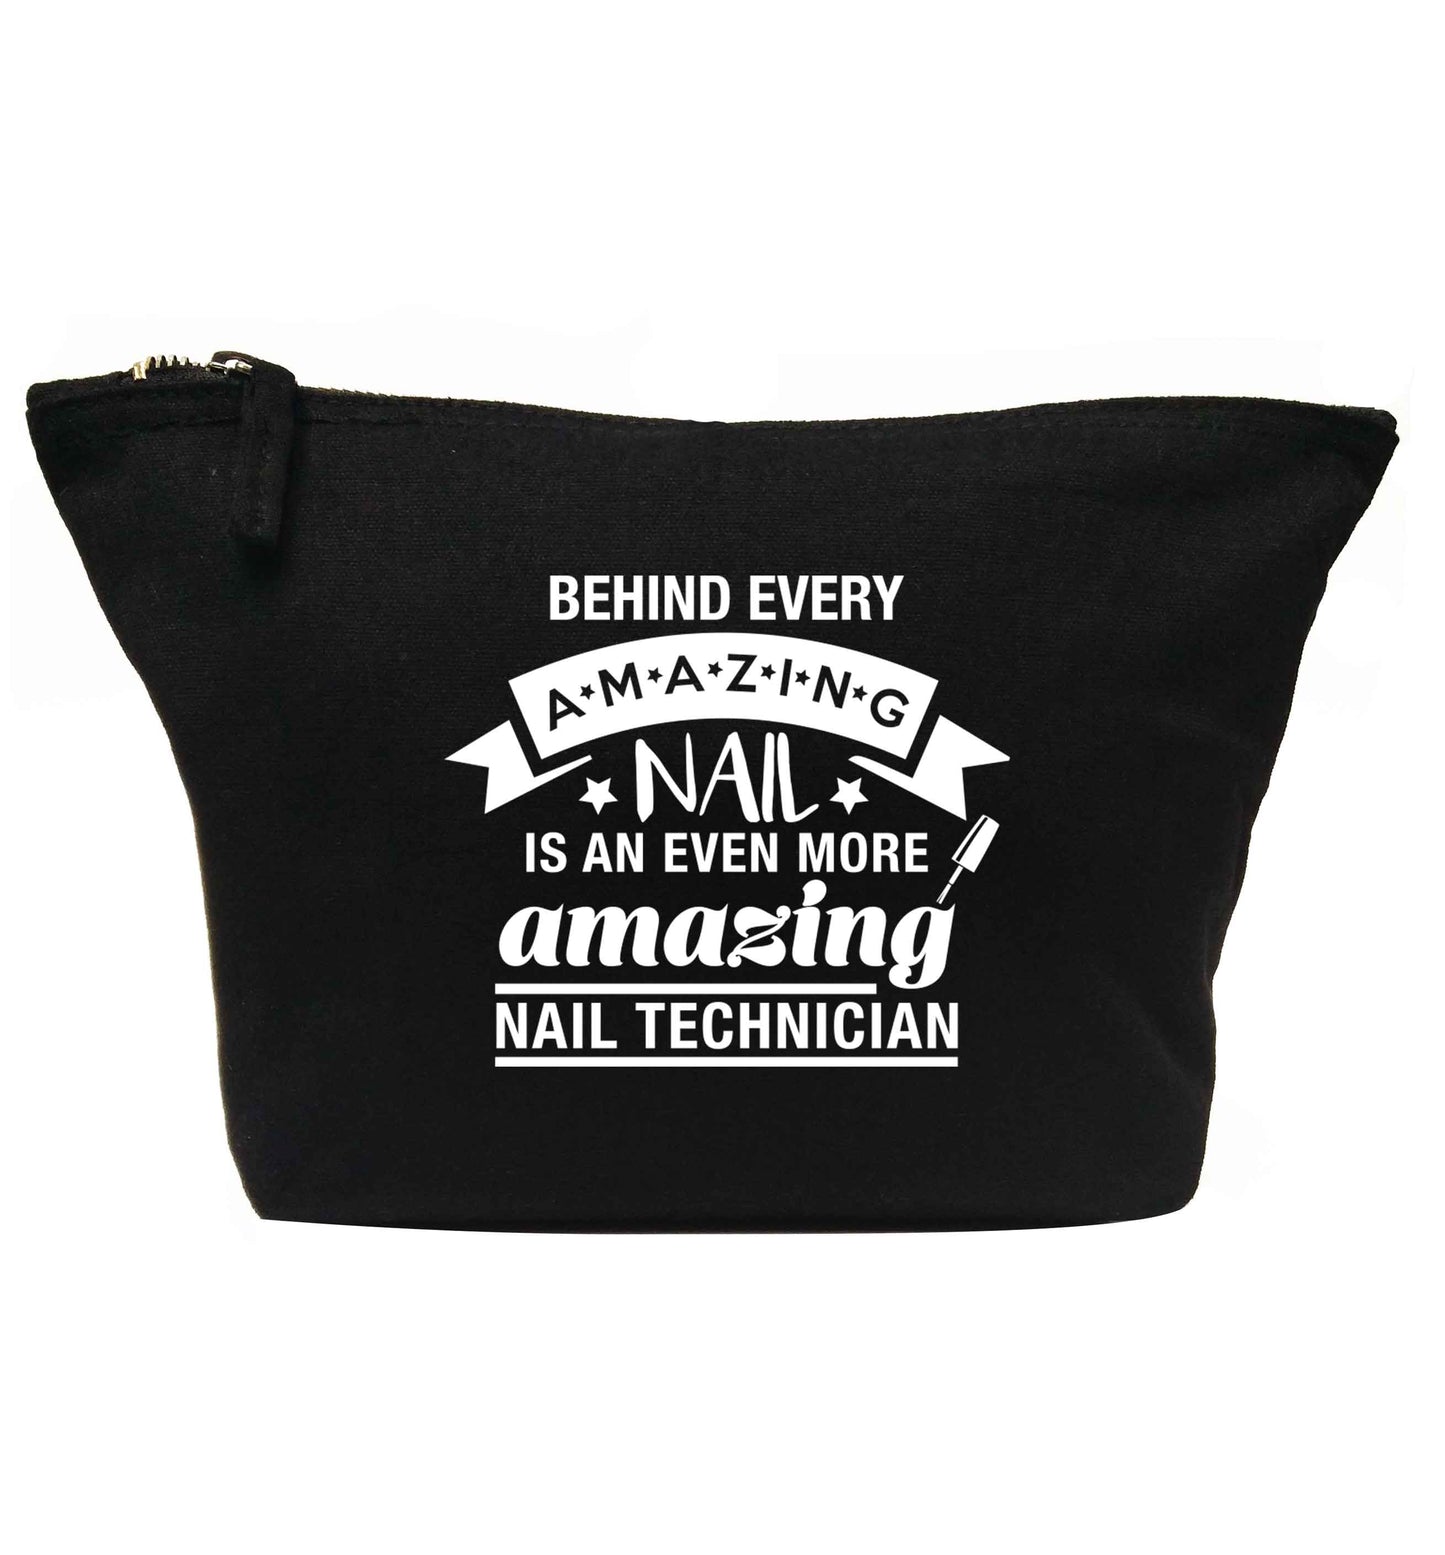 Behind every amazing nail is an even more amazing nail technician | Makeup / wash bag